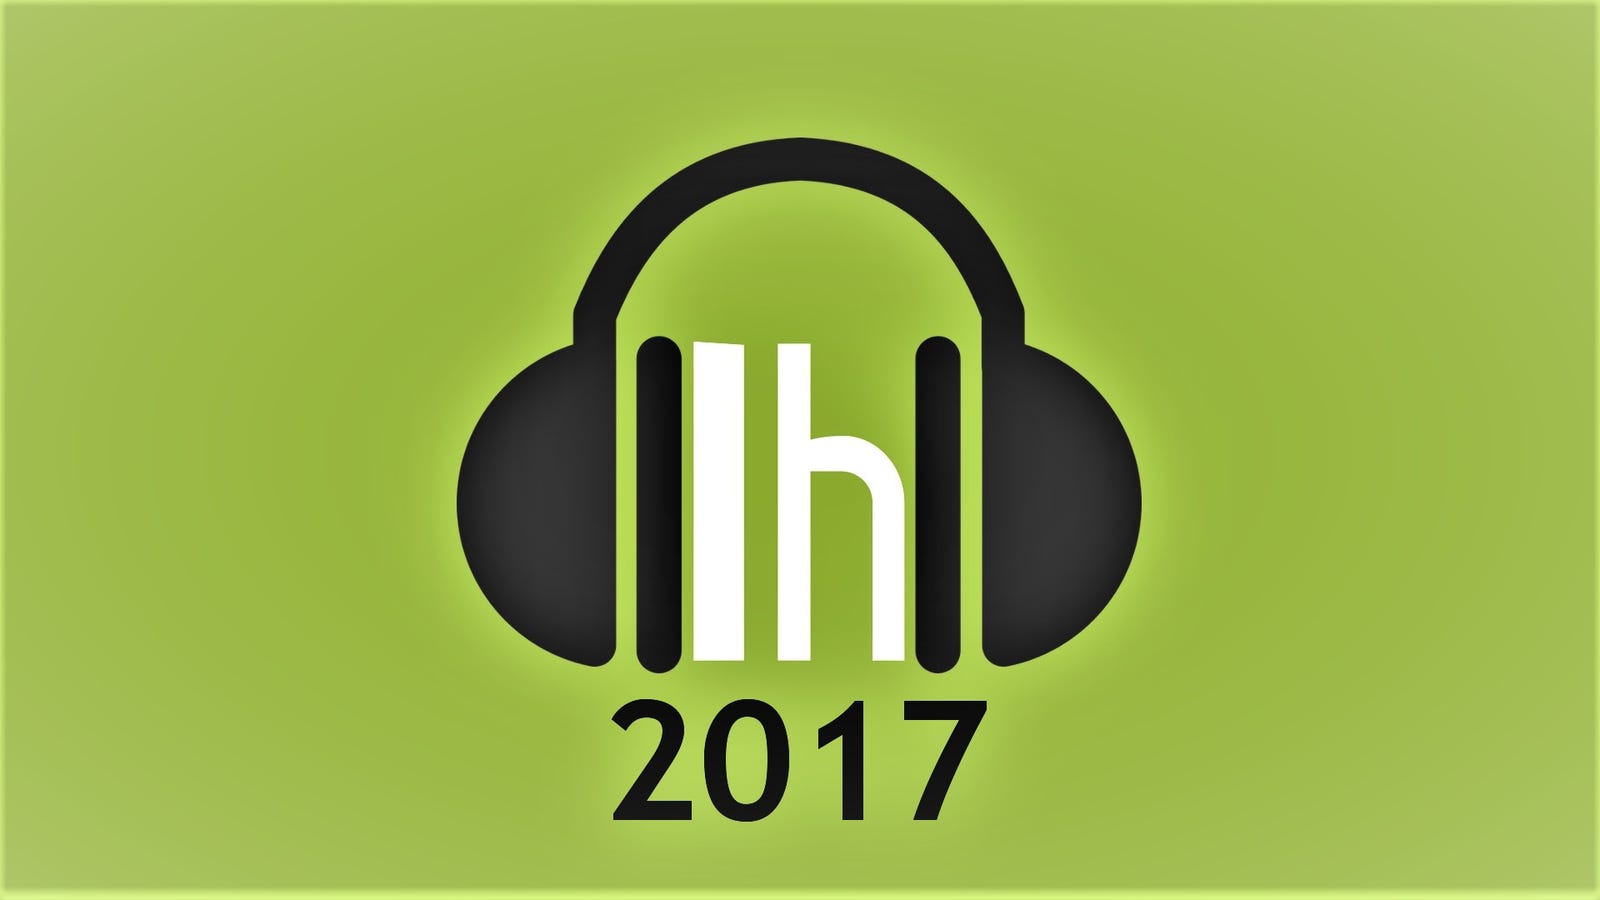 Our Favorite Podcast Episodes Of 2017